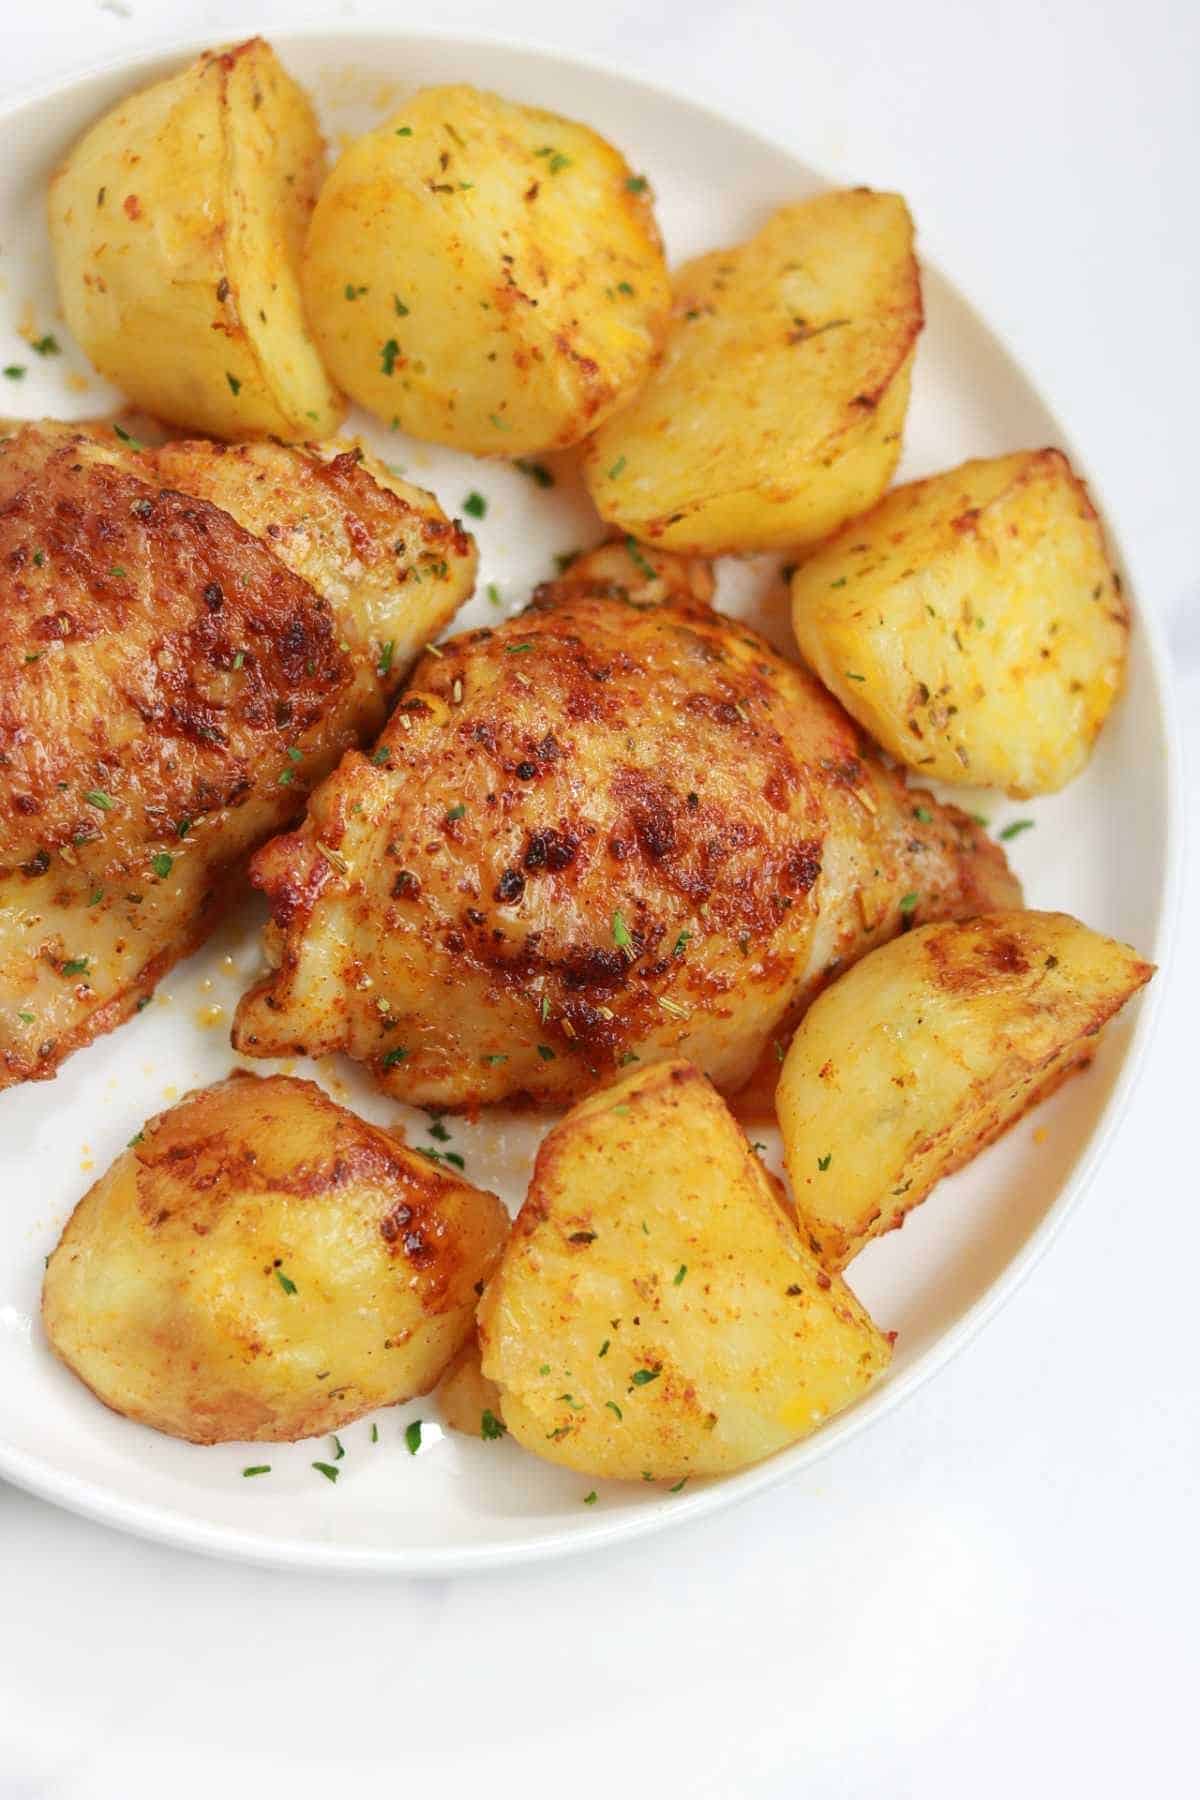 baked chicken and potatoes served on a white plate.